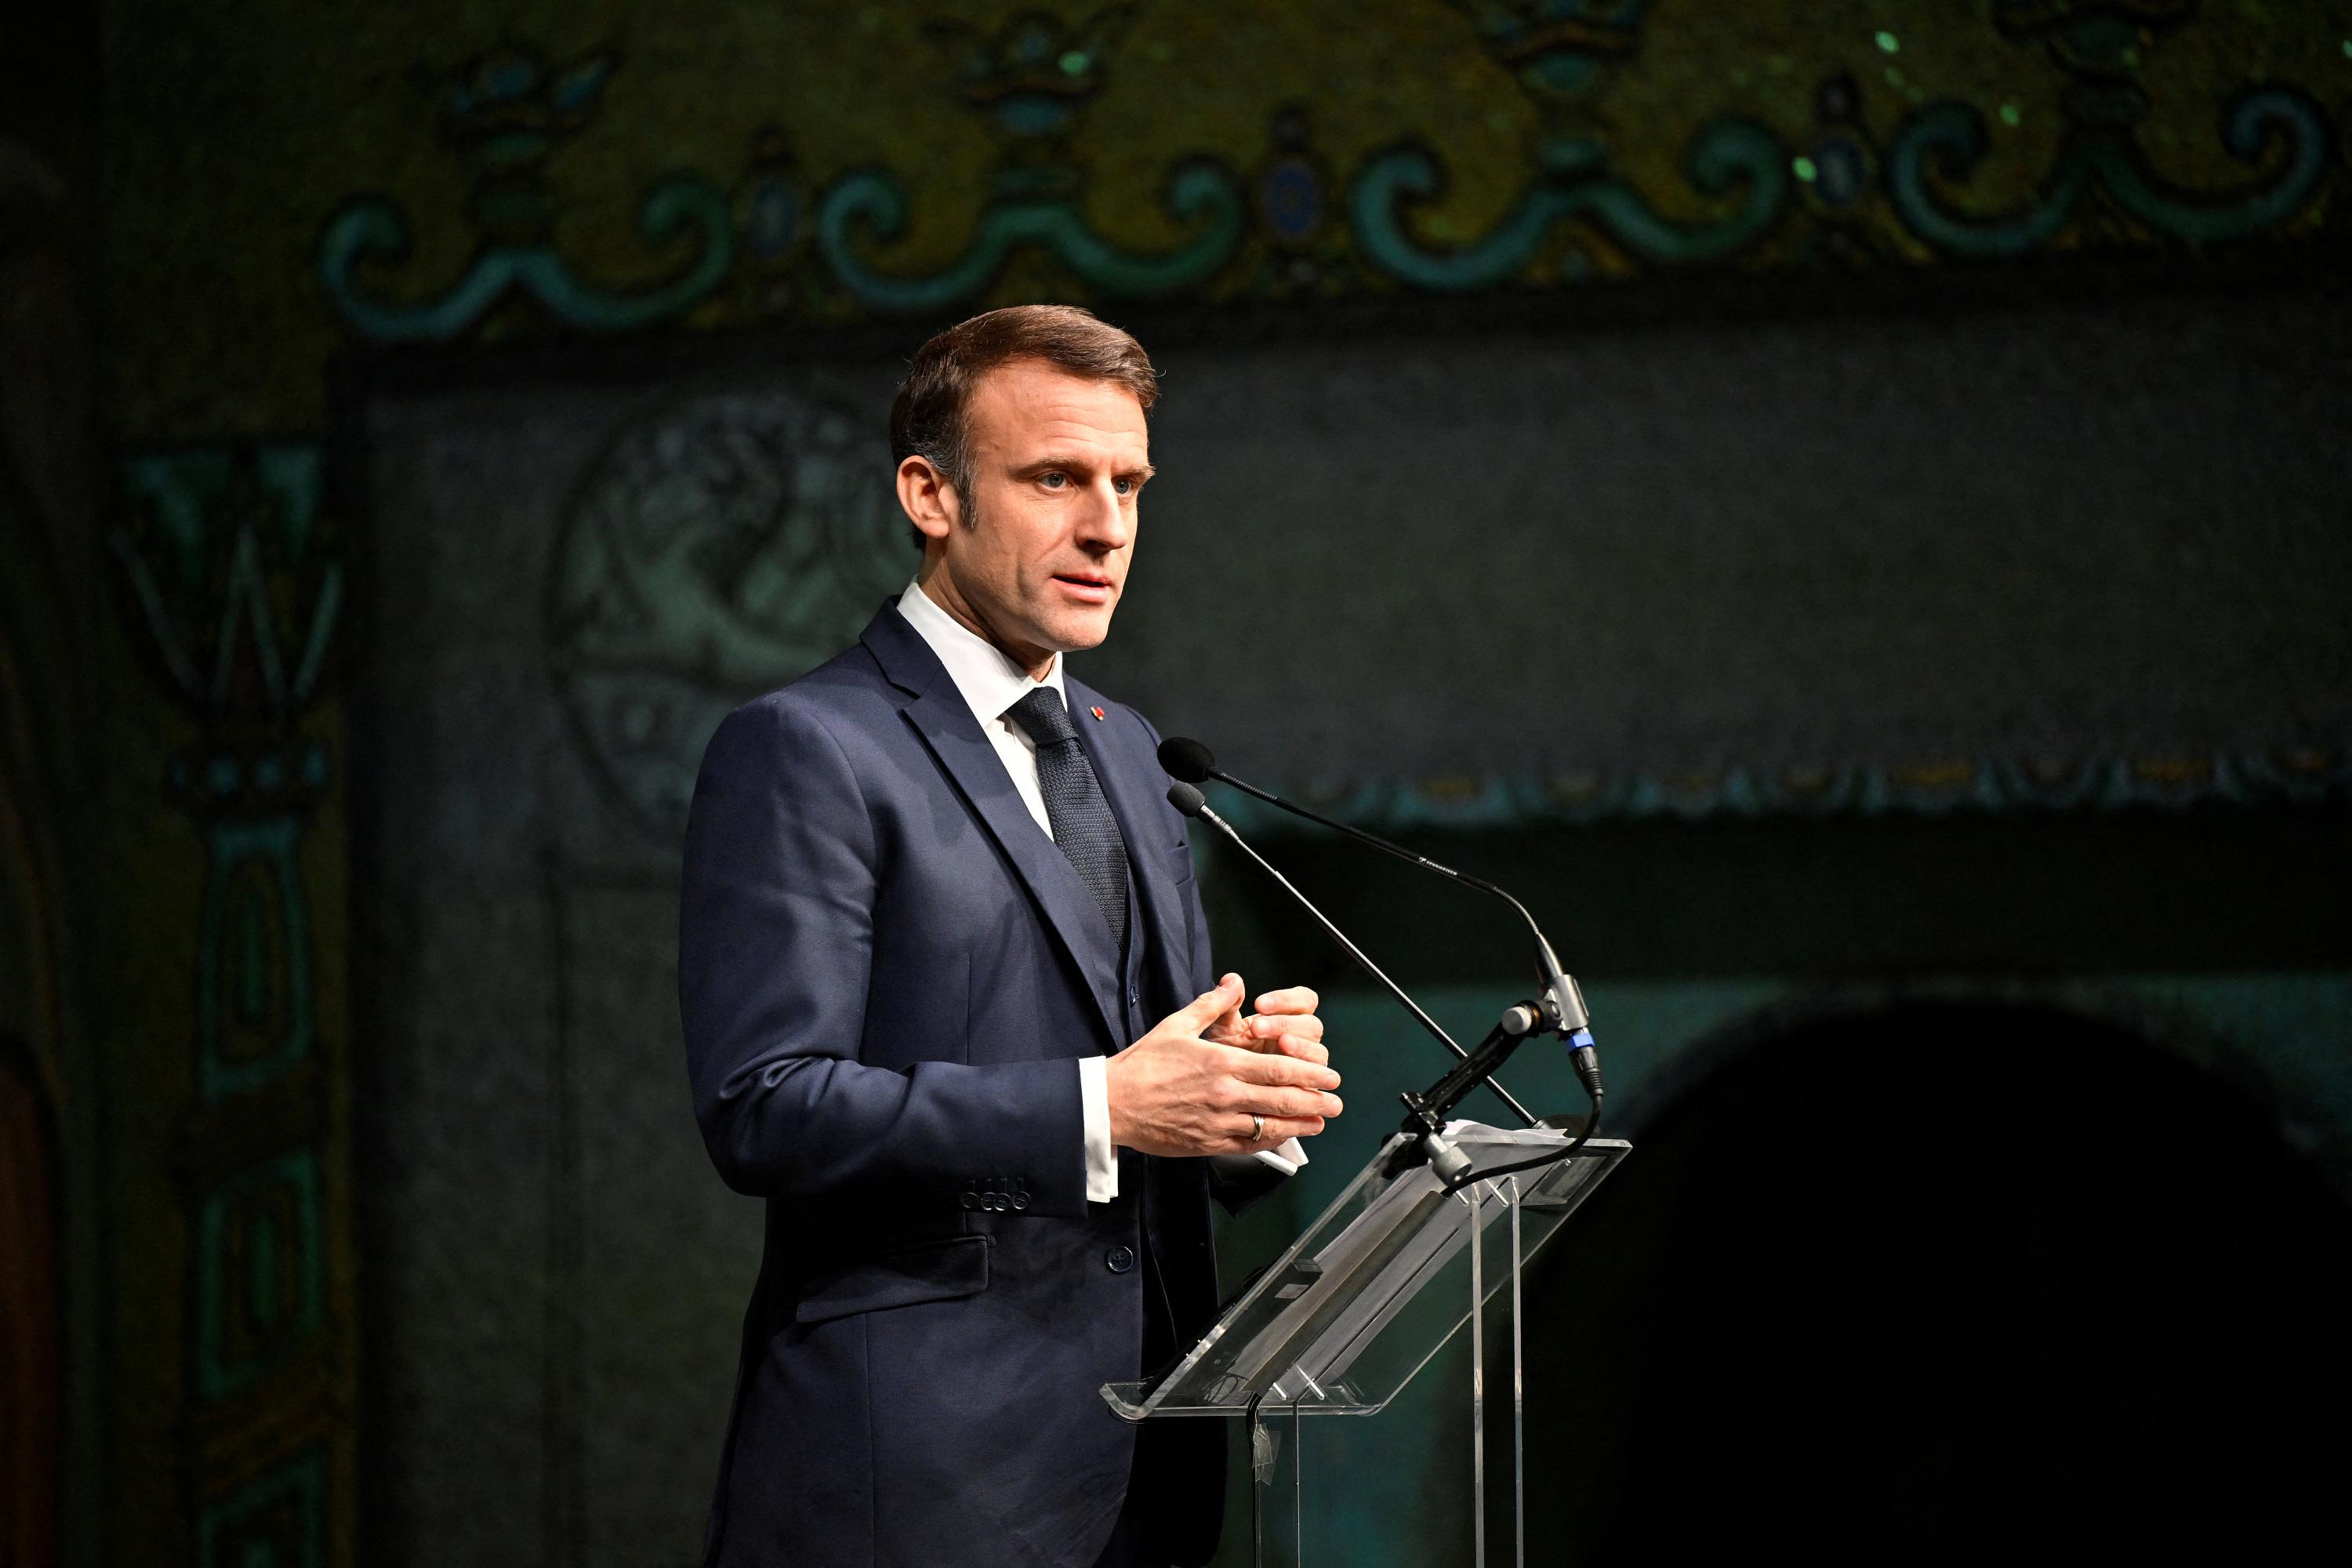 Does Emmanuel Macron want to make French nuclear deterrence available to Europeans?